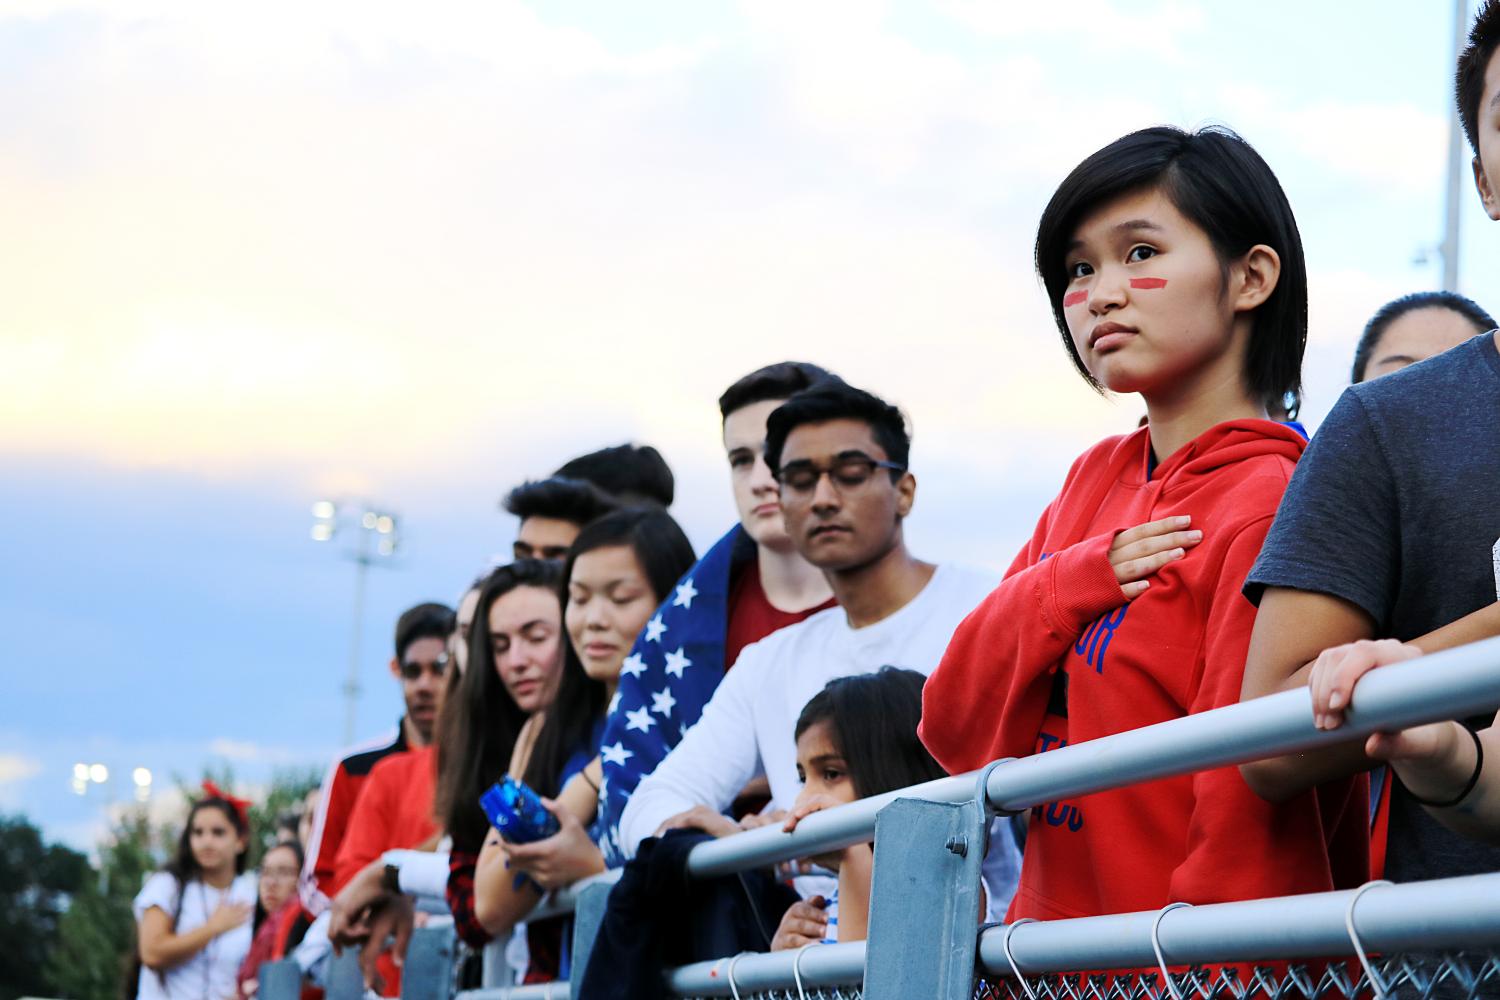 Junior Cynthia Zhang stands alongside others as the Star-Spangled Banner is performed by students on the track surrounding the football field.